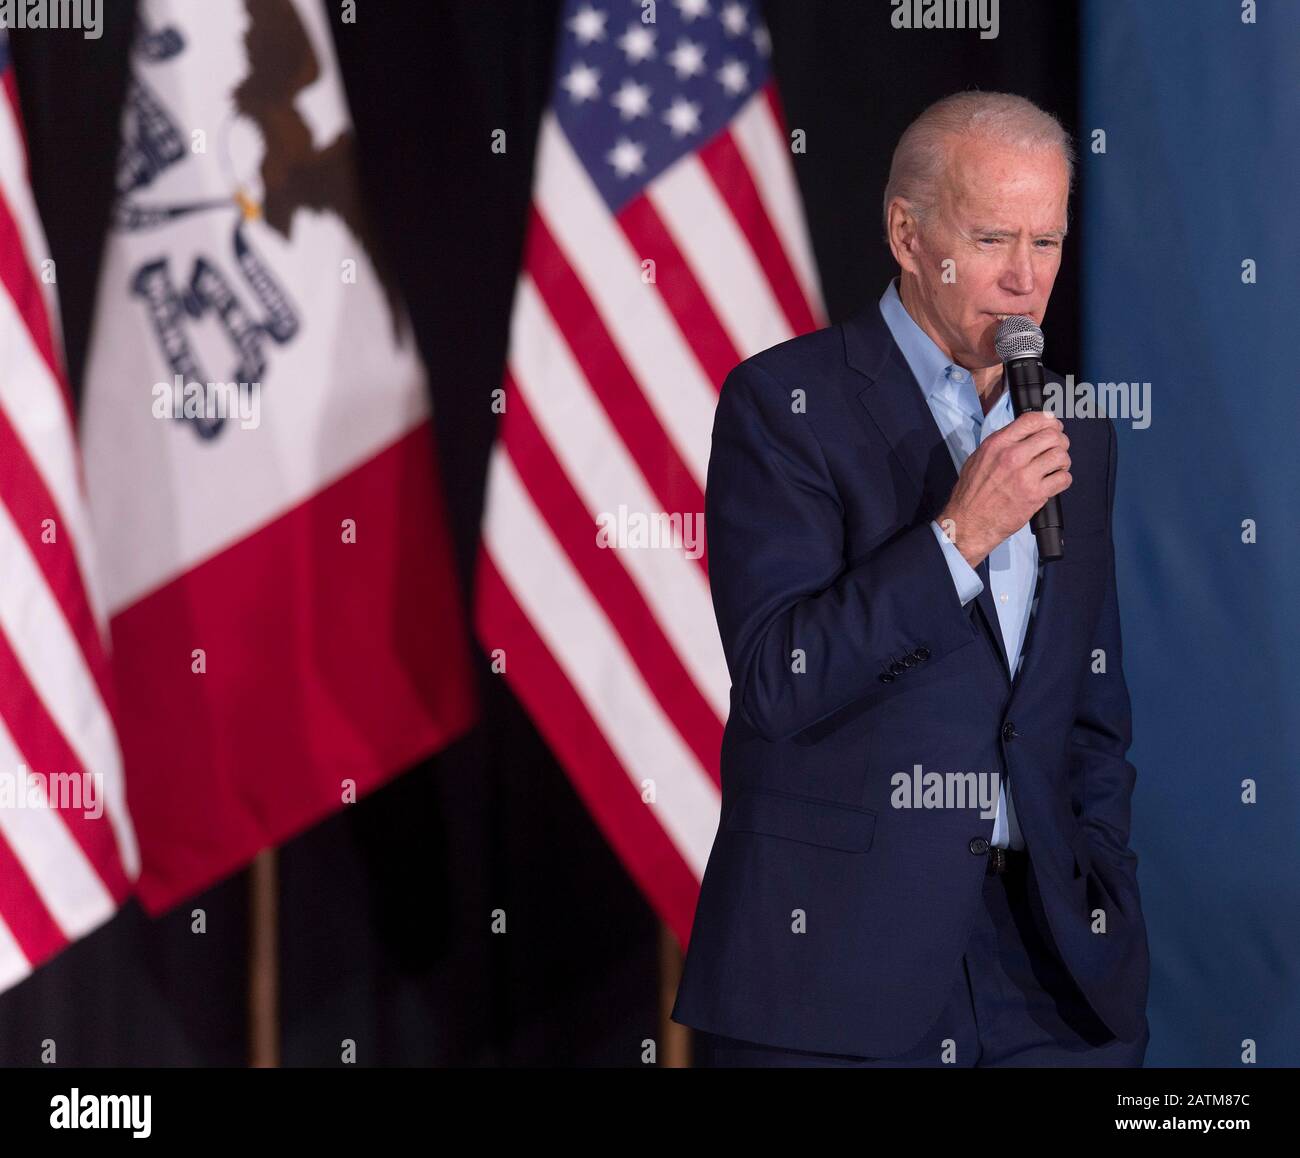 Des Moines, Iowa, USA. 03rd Feb, 2020. Former Vice President and Democratic presidential candidate JOE BIDEN speaks at Drake University. Finals results from the Iowa caucuses were delayed and not released at the time of his remarks. Credit: Brian Cahn/ZUMA Wire/Alamy Live News Stock Photo